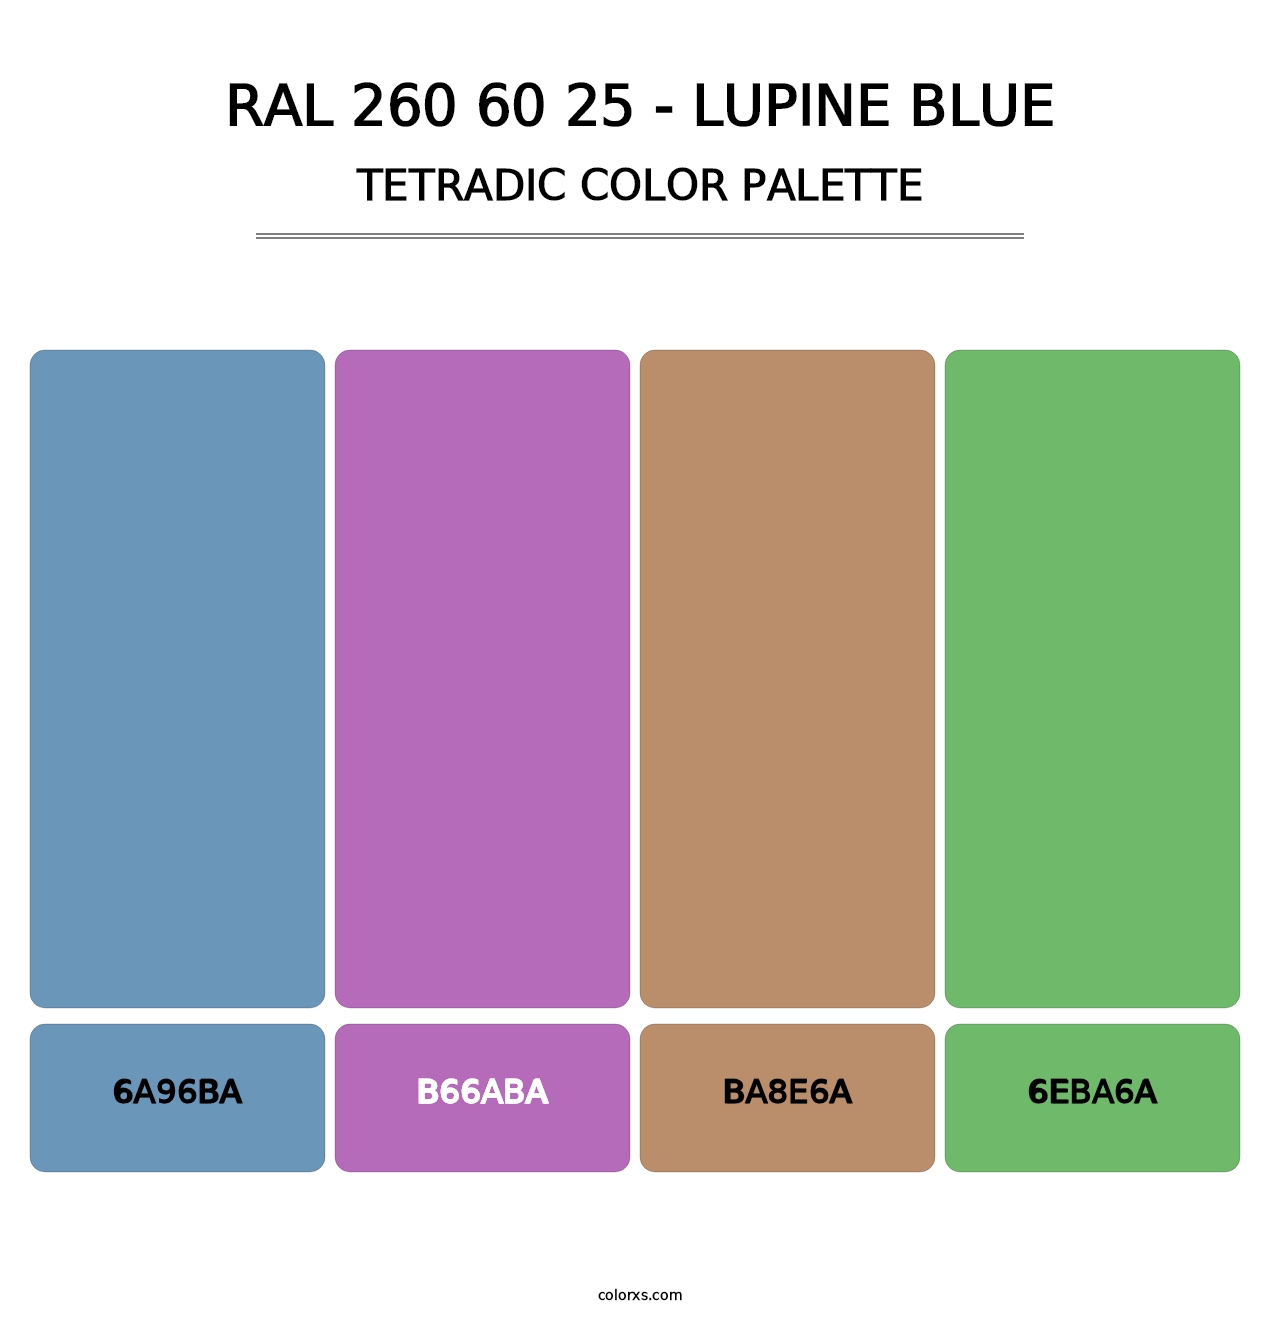 RAL 260 60 25 - Lupine Blue - Tetradic Color Palette